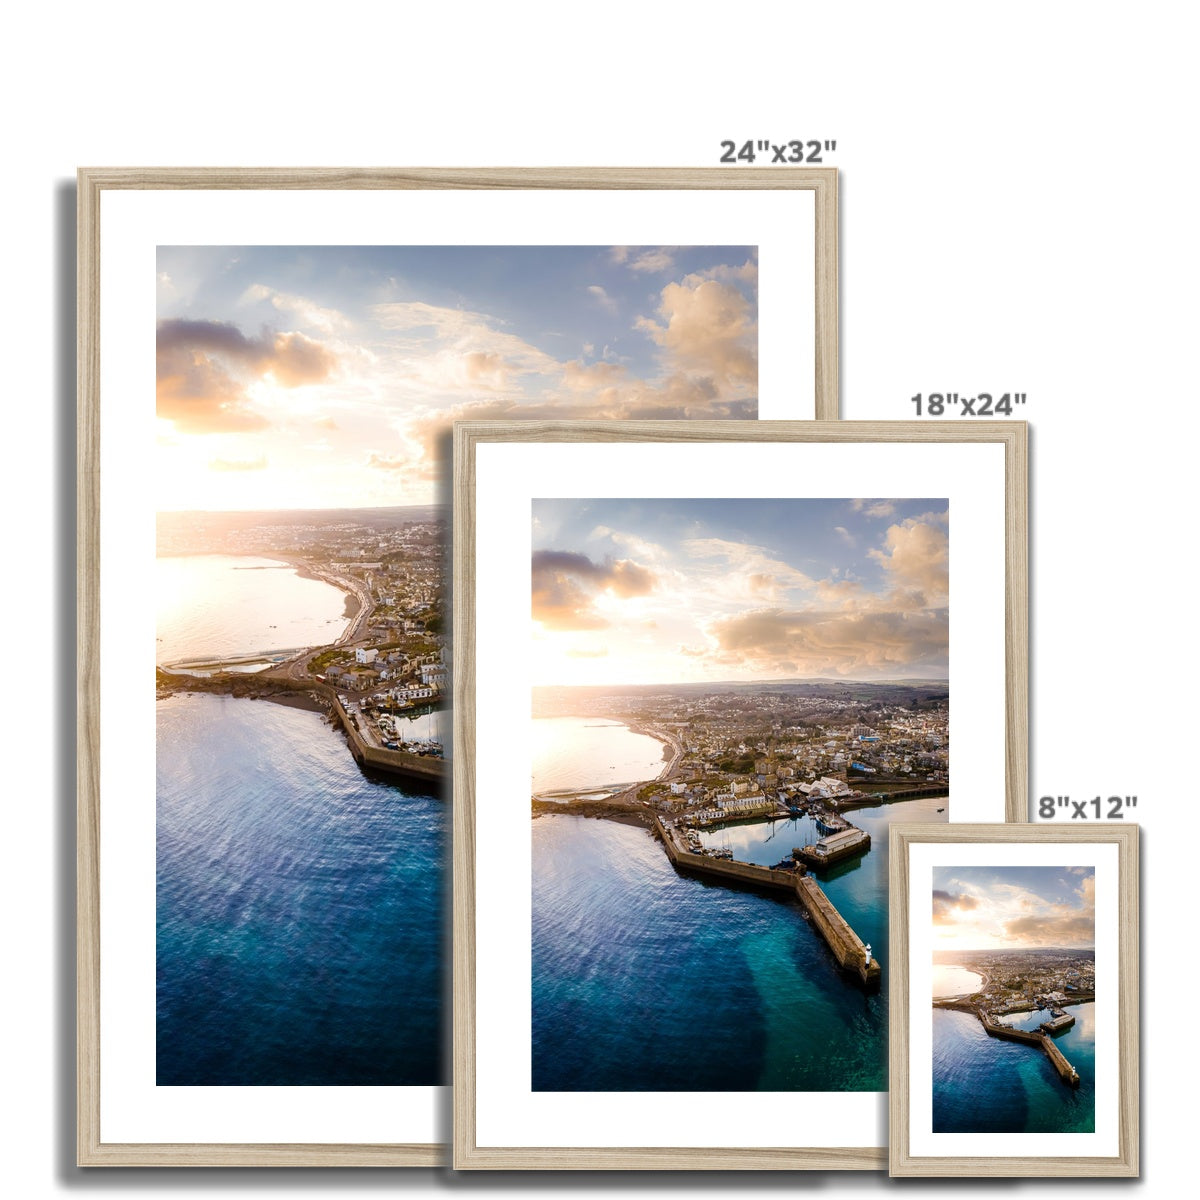 penzance harbour view wooden frame sizes